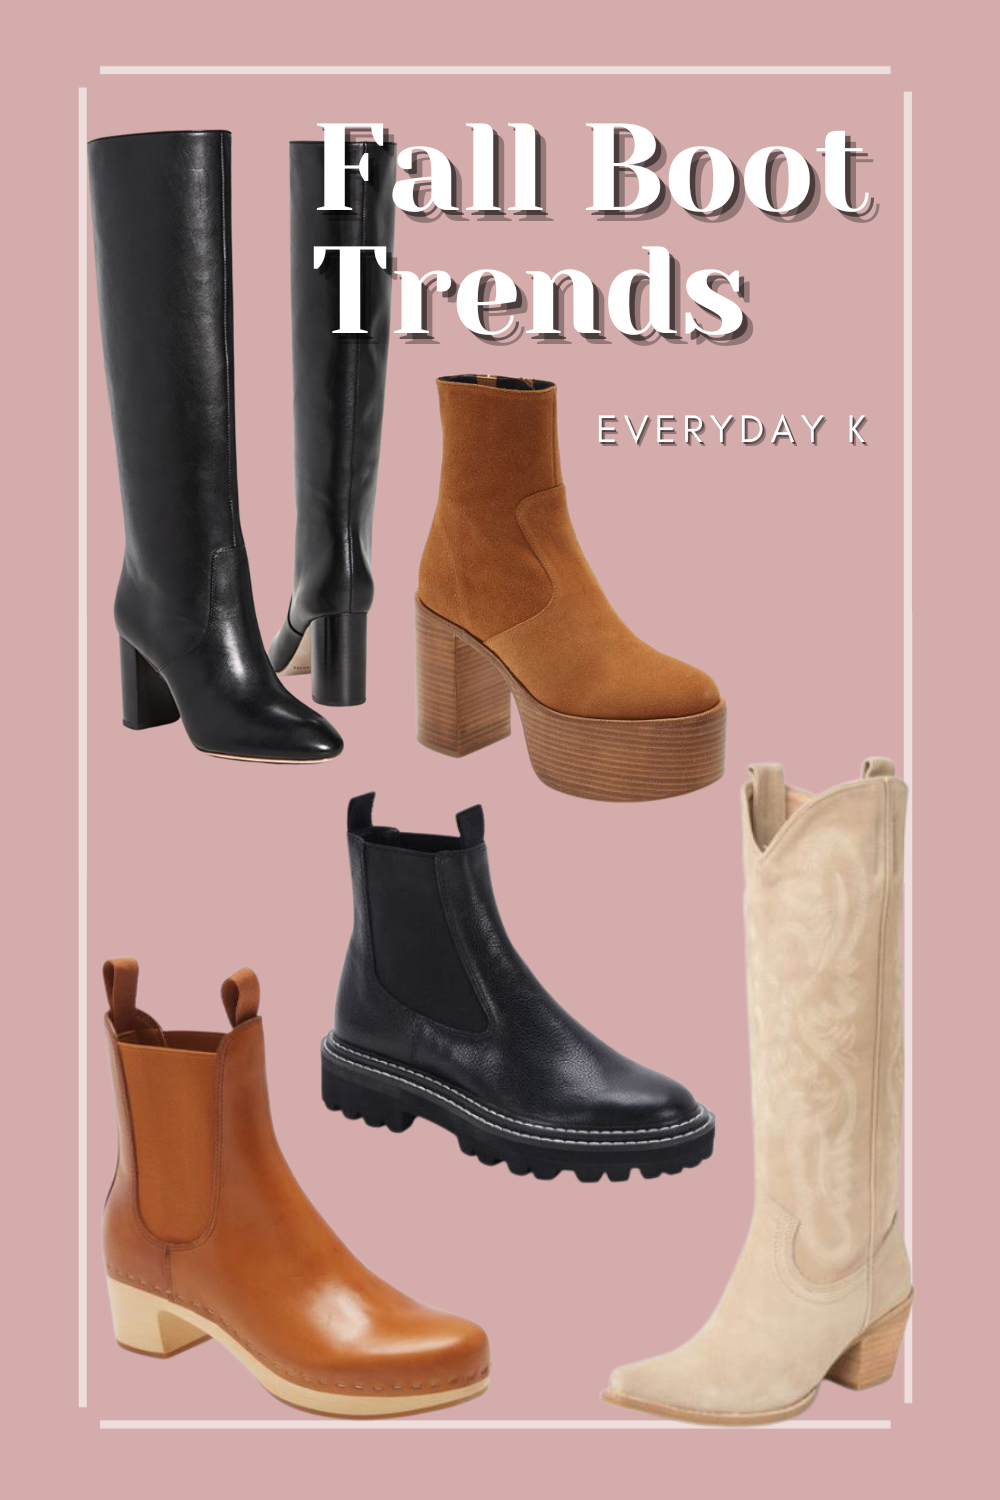 Fall Boot Trends Everyday K